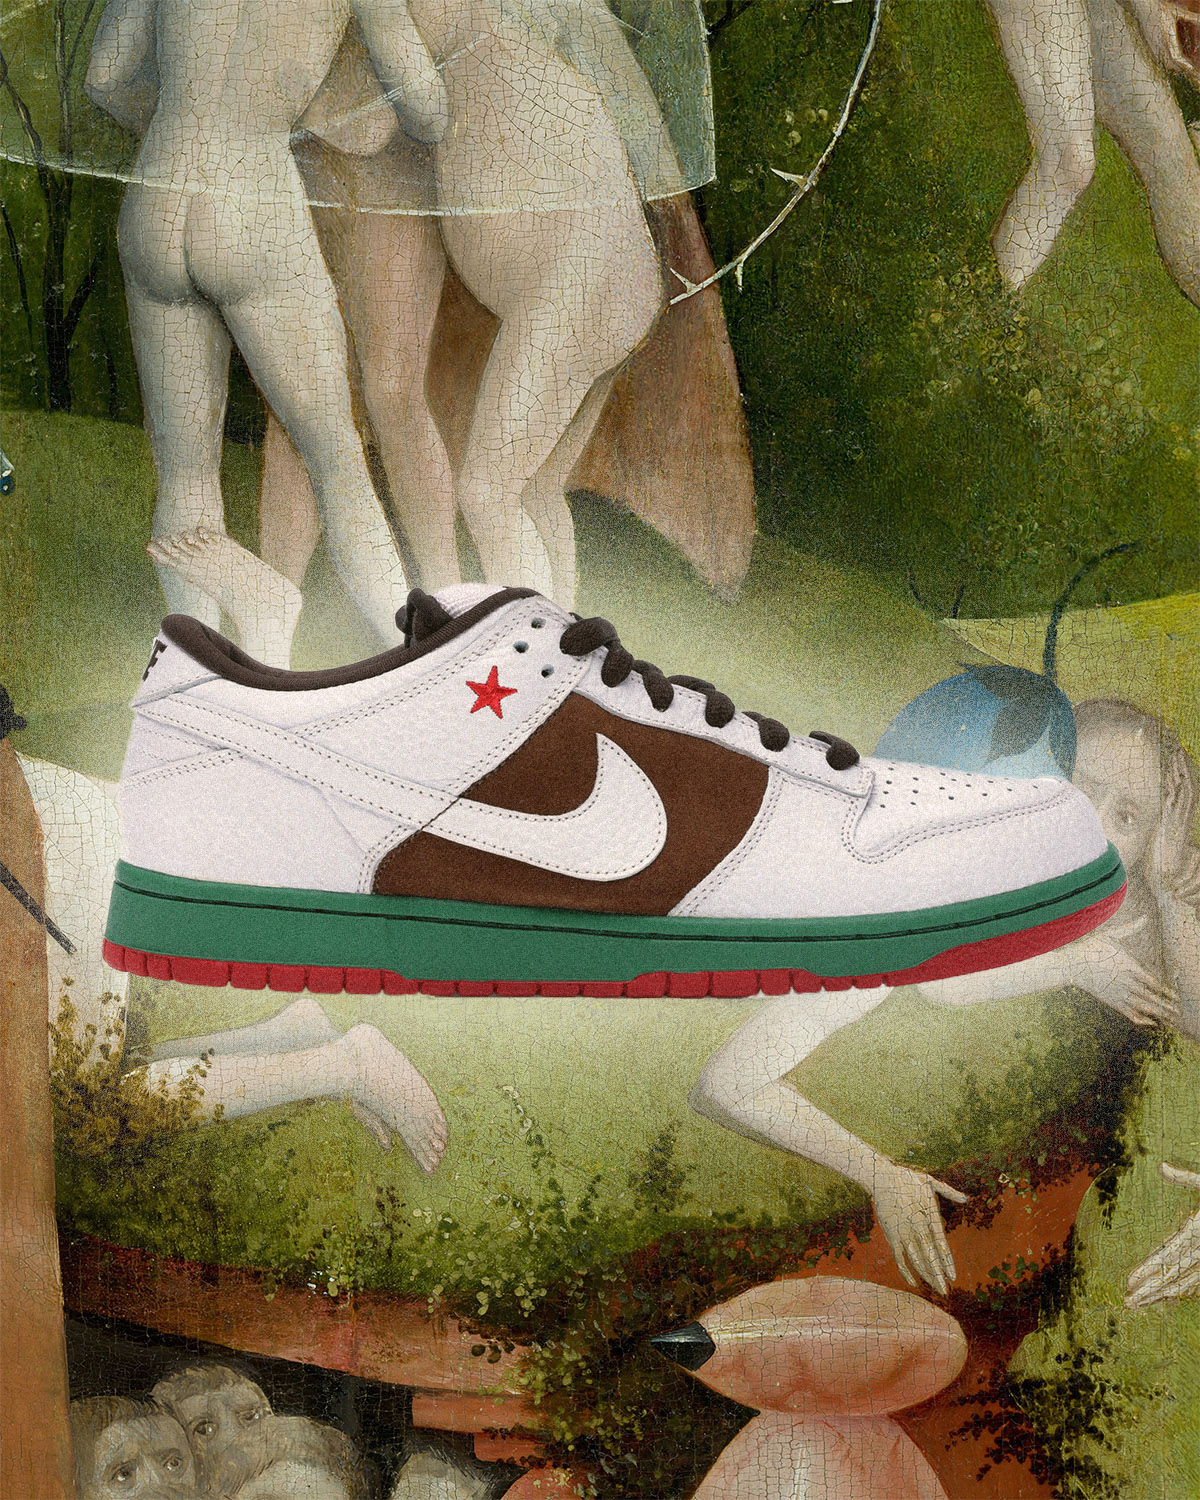 The History of the Nike Dunk and the Nike SB Dunk